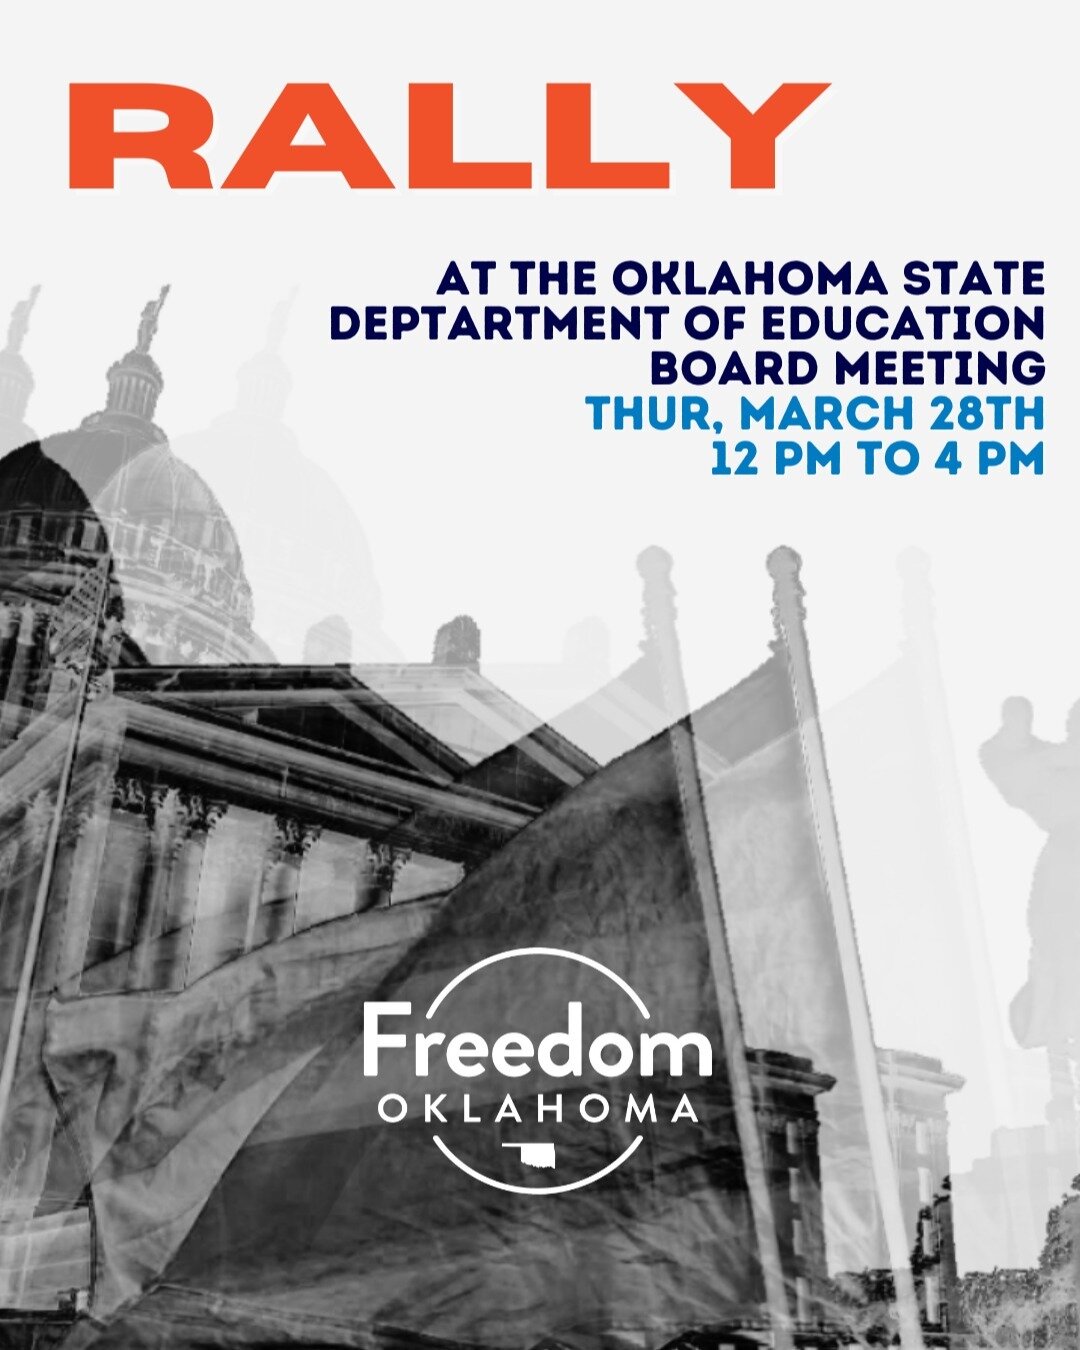 The OK State Board of Education may have limited public comment, but they can&rsquo;t silence public solidarity and demands for accountability. Join us at 12 noon on Thursday, March 28 at the Oliver Hodge Building in OKC as we take up space and ensur